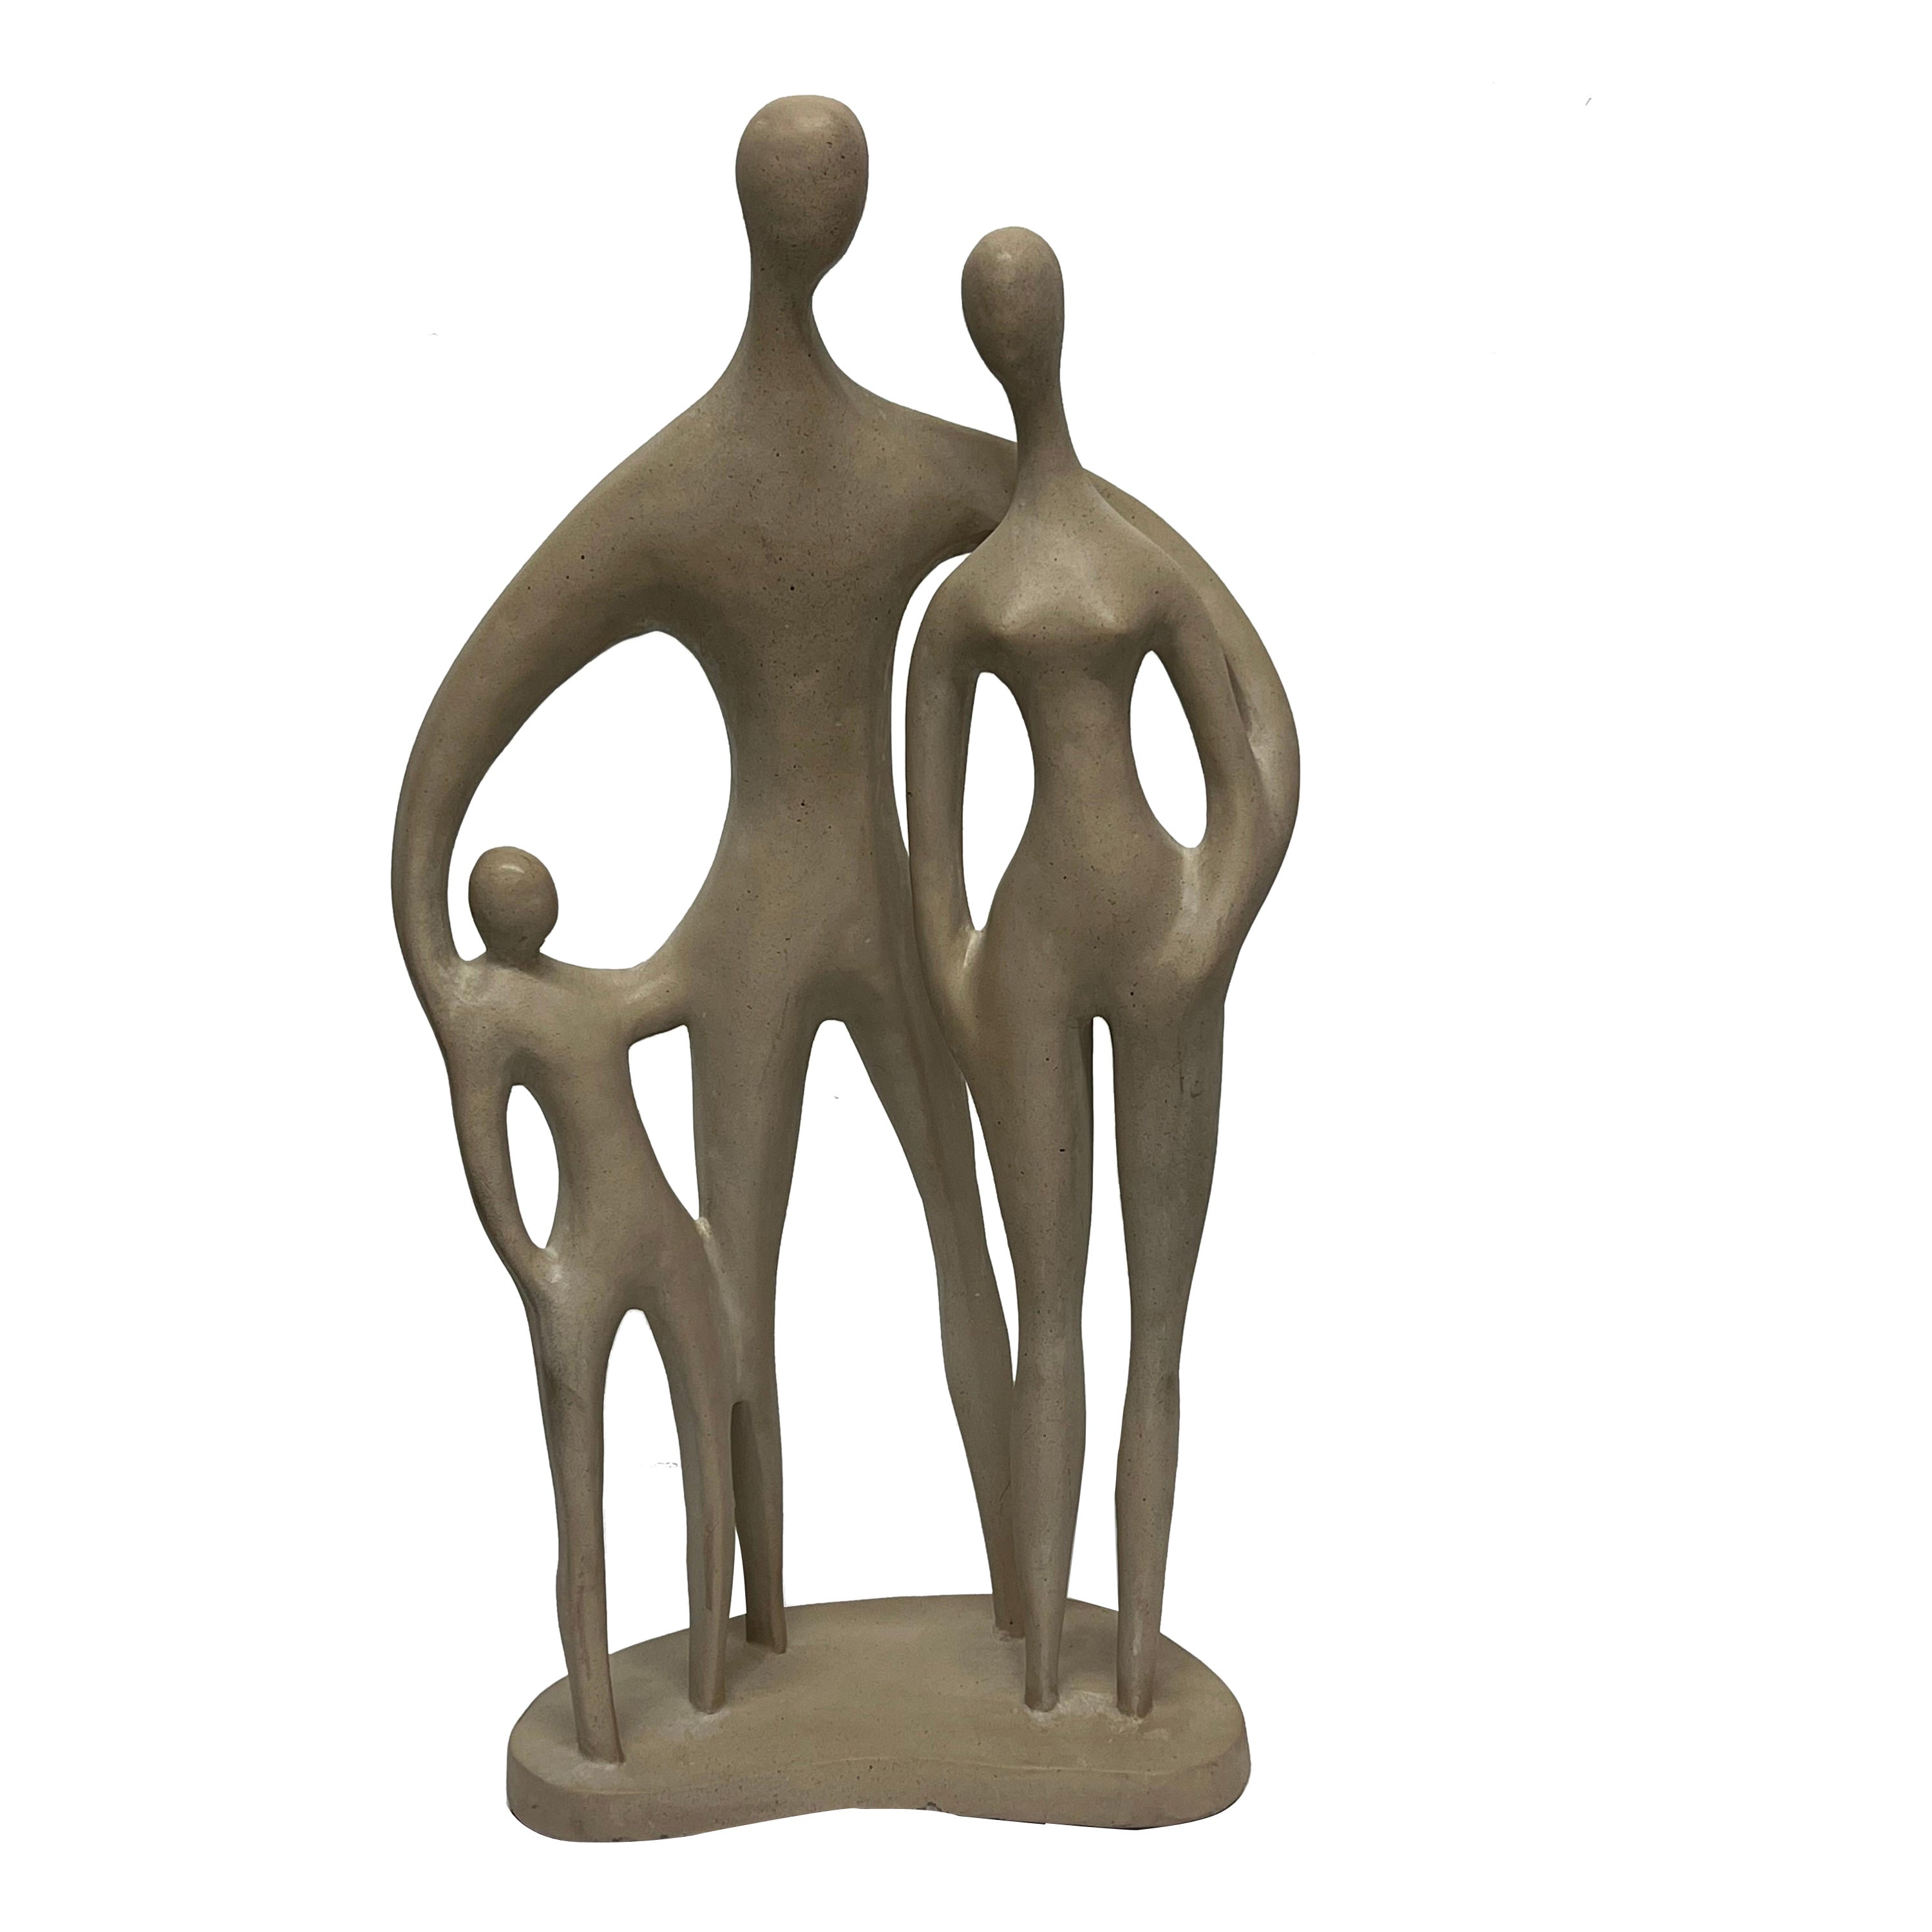 Austin Productions Modernist Style Family Pottery Sculpture, 1979